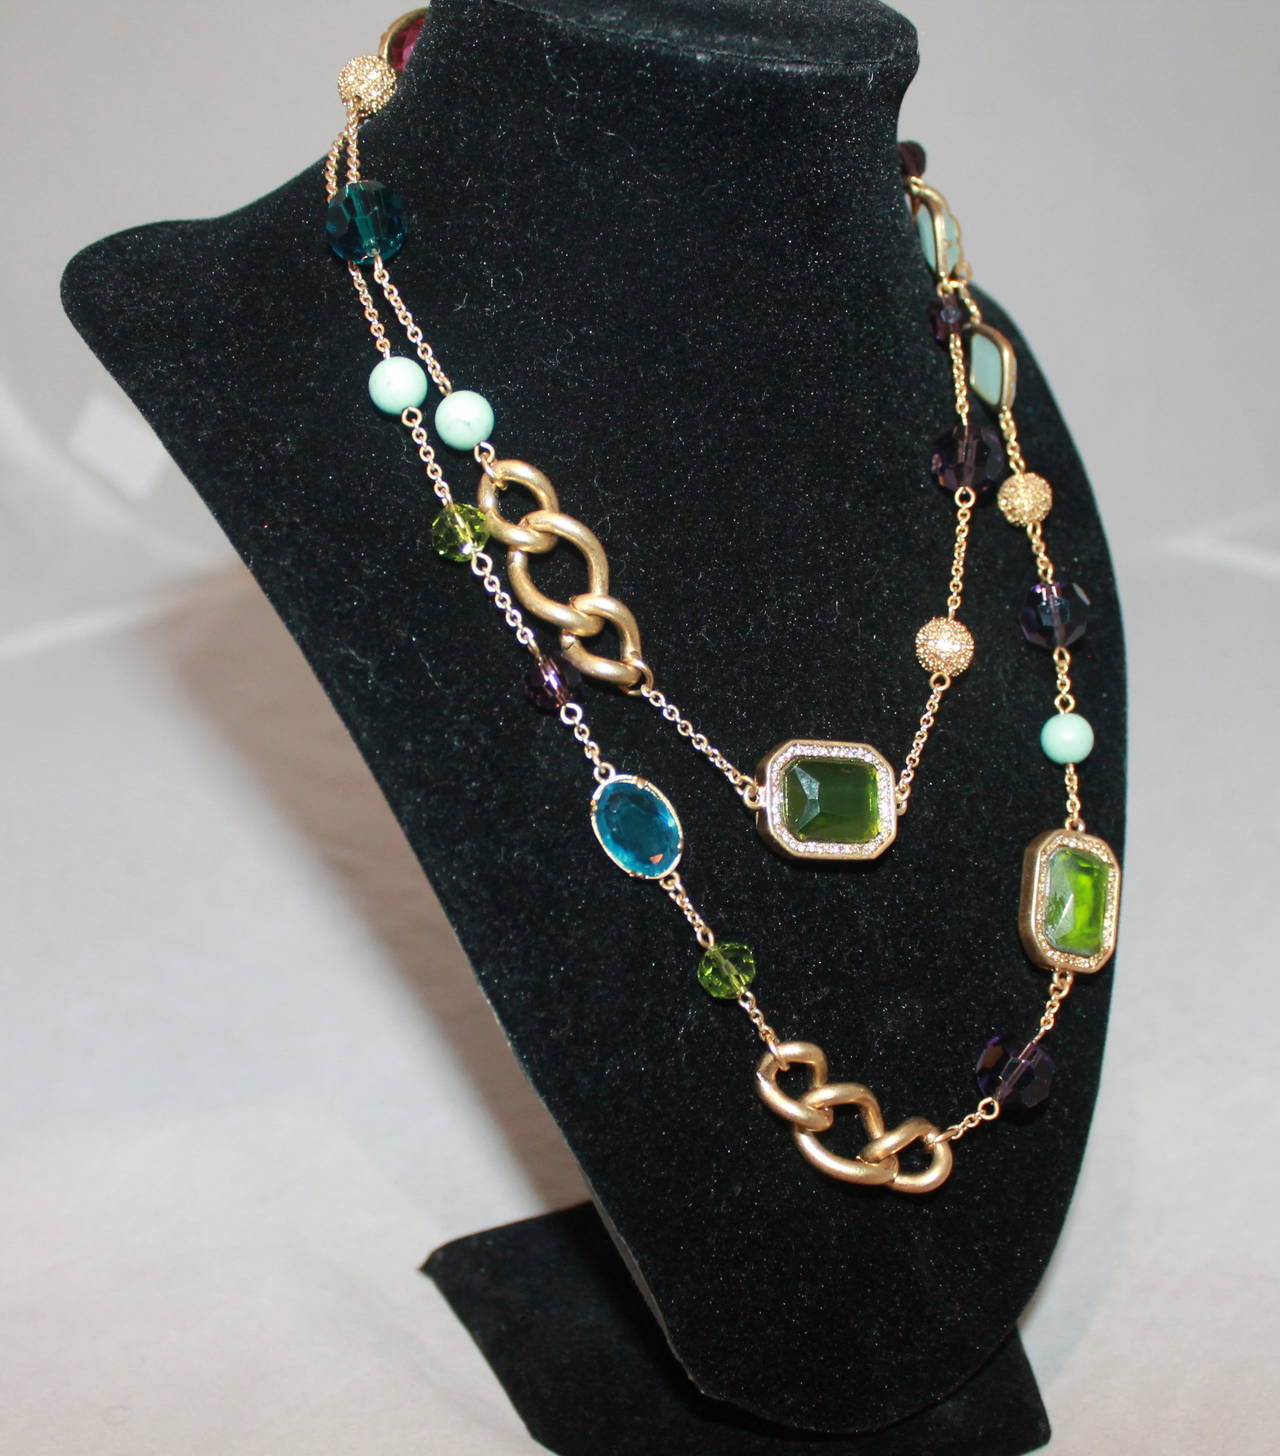 Kenneth Jay Lane Multi Stone, Bead & Chicklet Necklace. This necklace is in very good condition and can be worn single or doubled. 

Length- 34